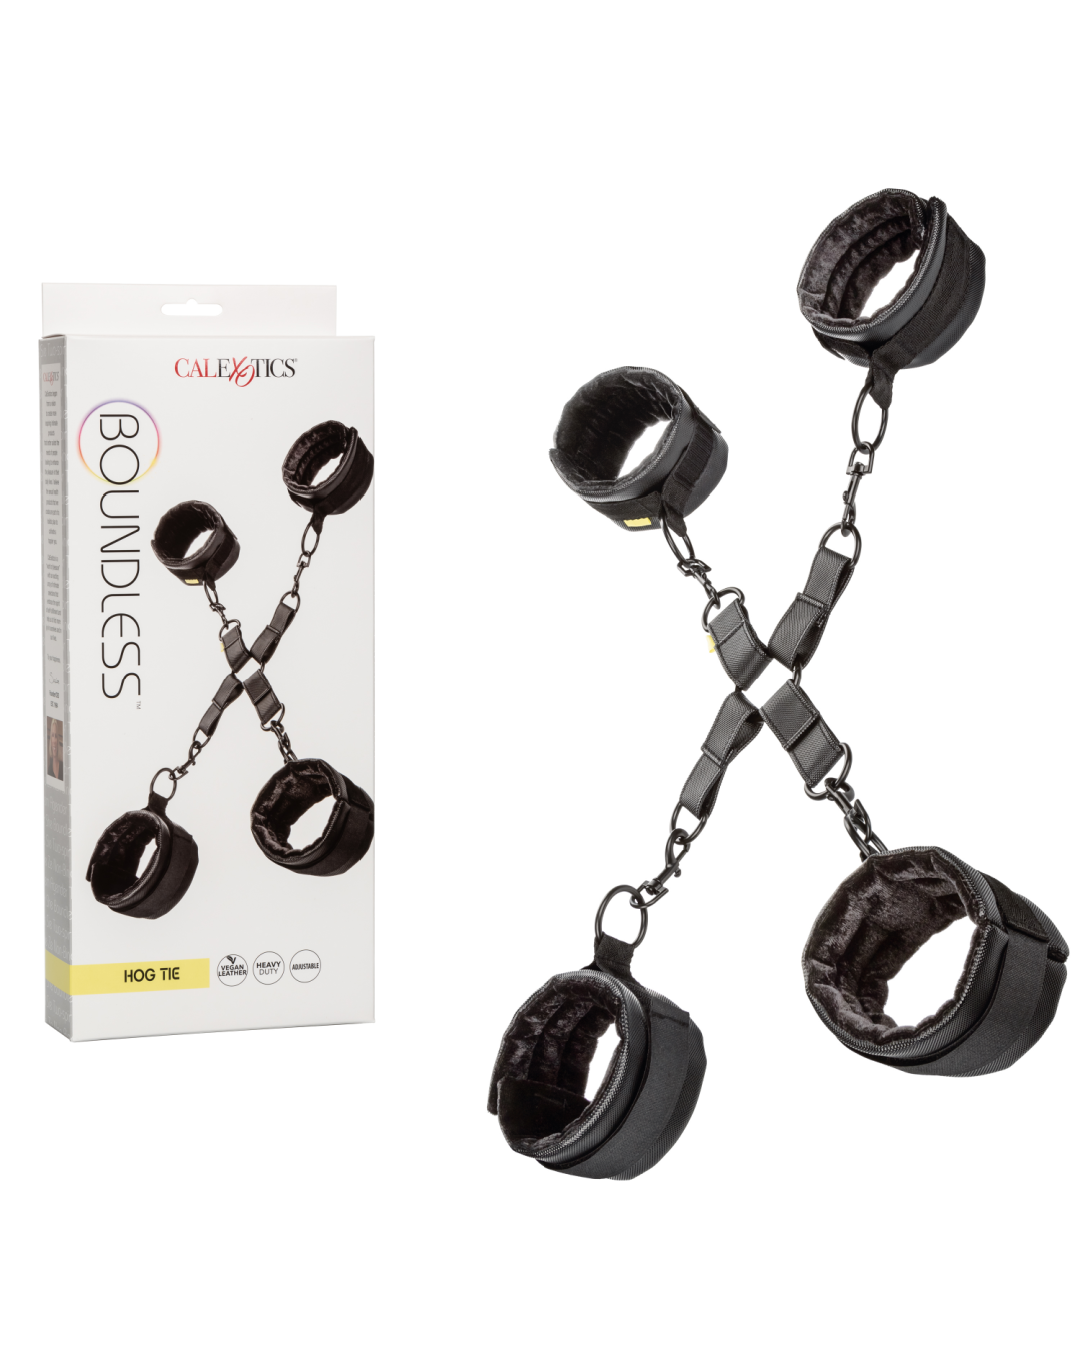 Boundless Hog Tie by Calexotics  product and box 